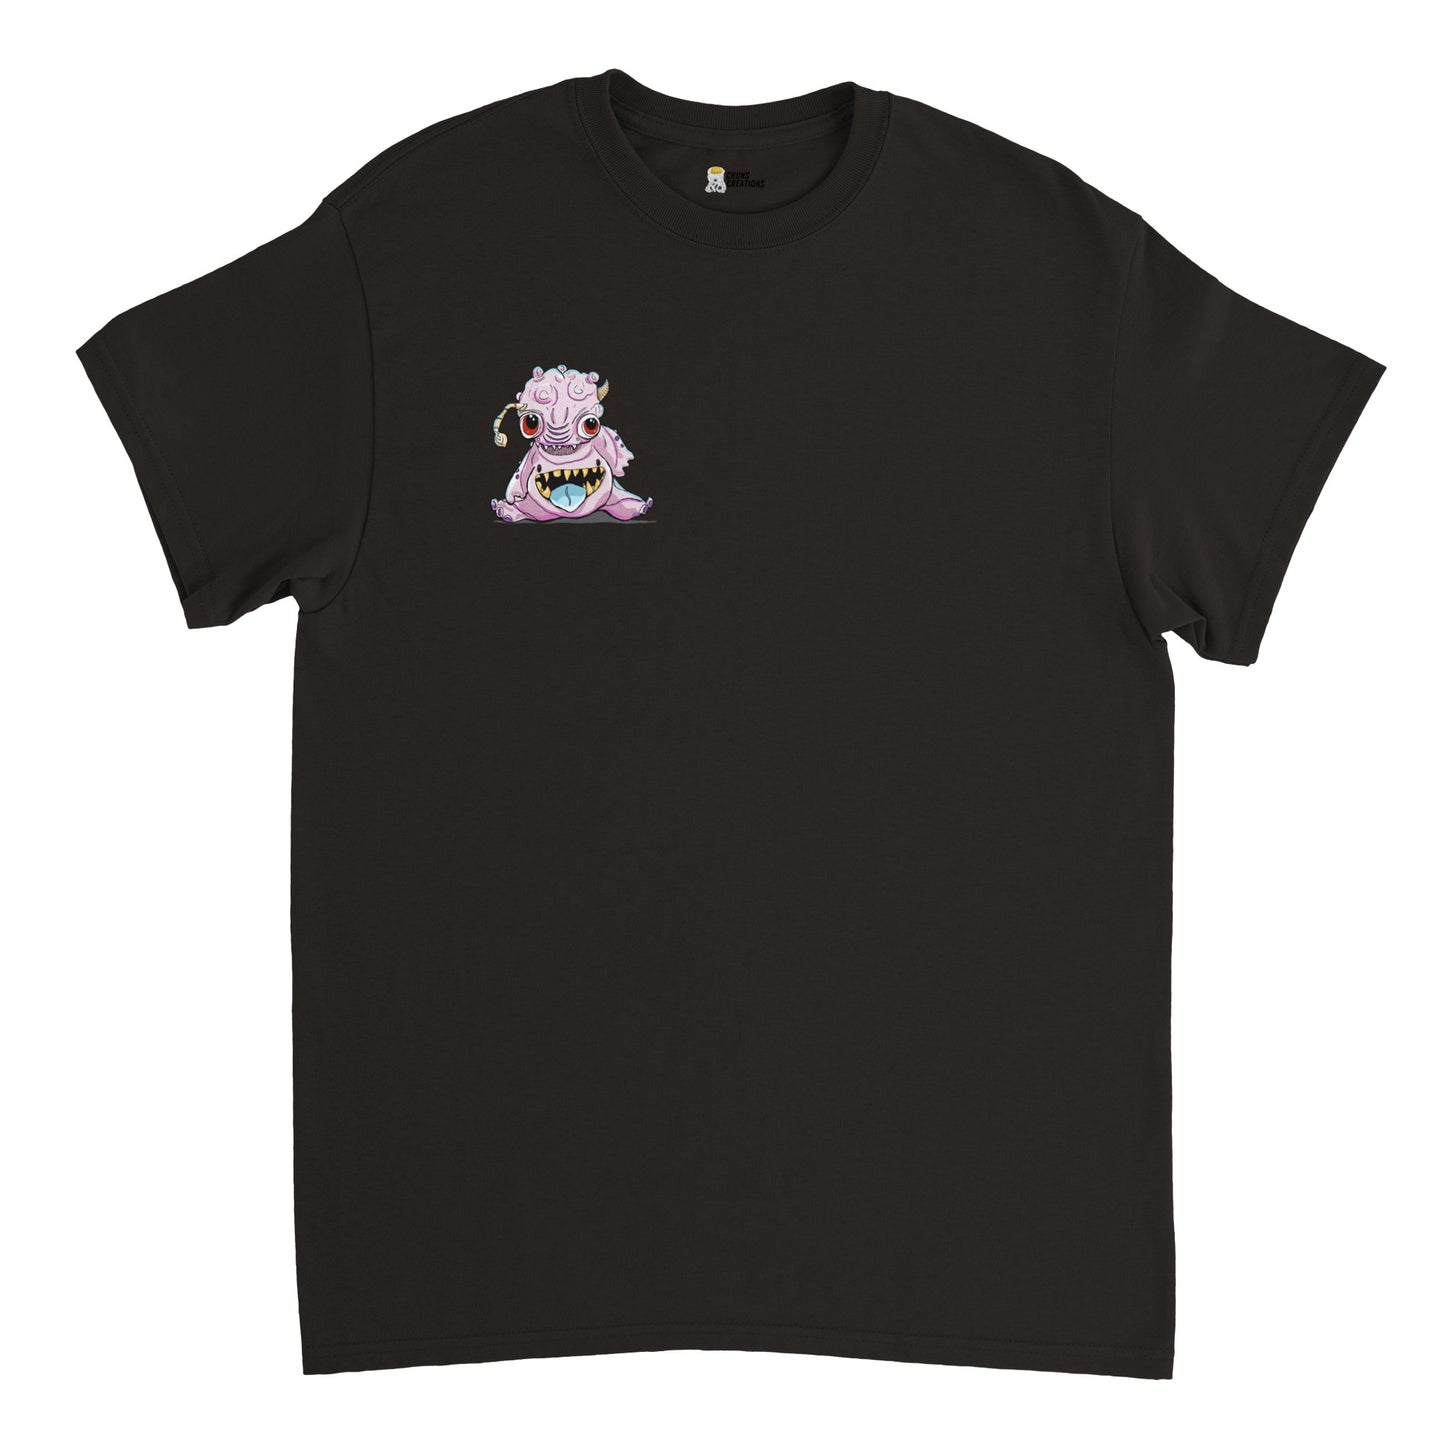 Black shirt. With a pink bublegum looking alien creature on the front of the shirt small "pocket sized" display on the front left